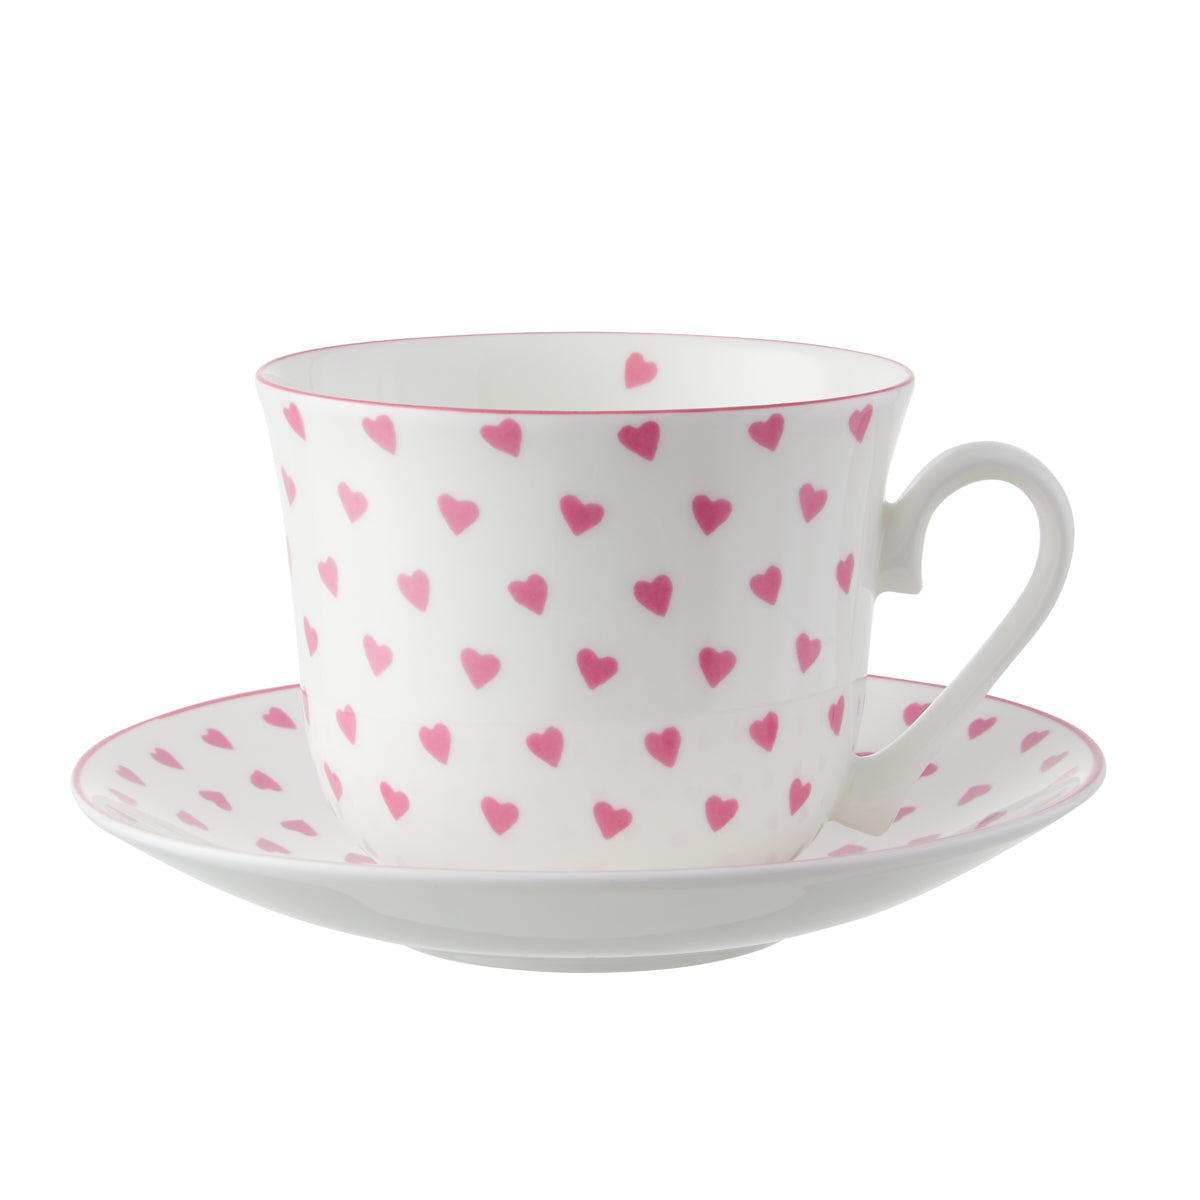 Nina Campbell Chatsworth Breakfast Cup & Saucer - Pink Heart